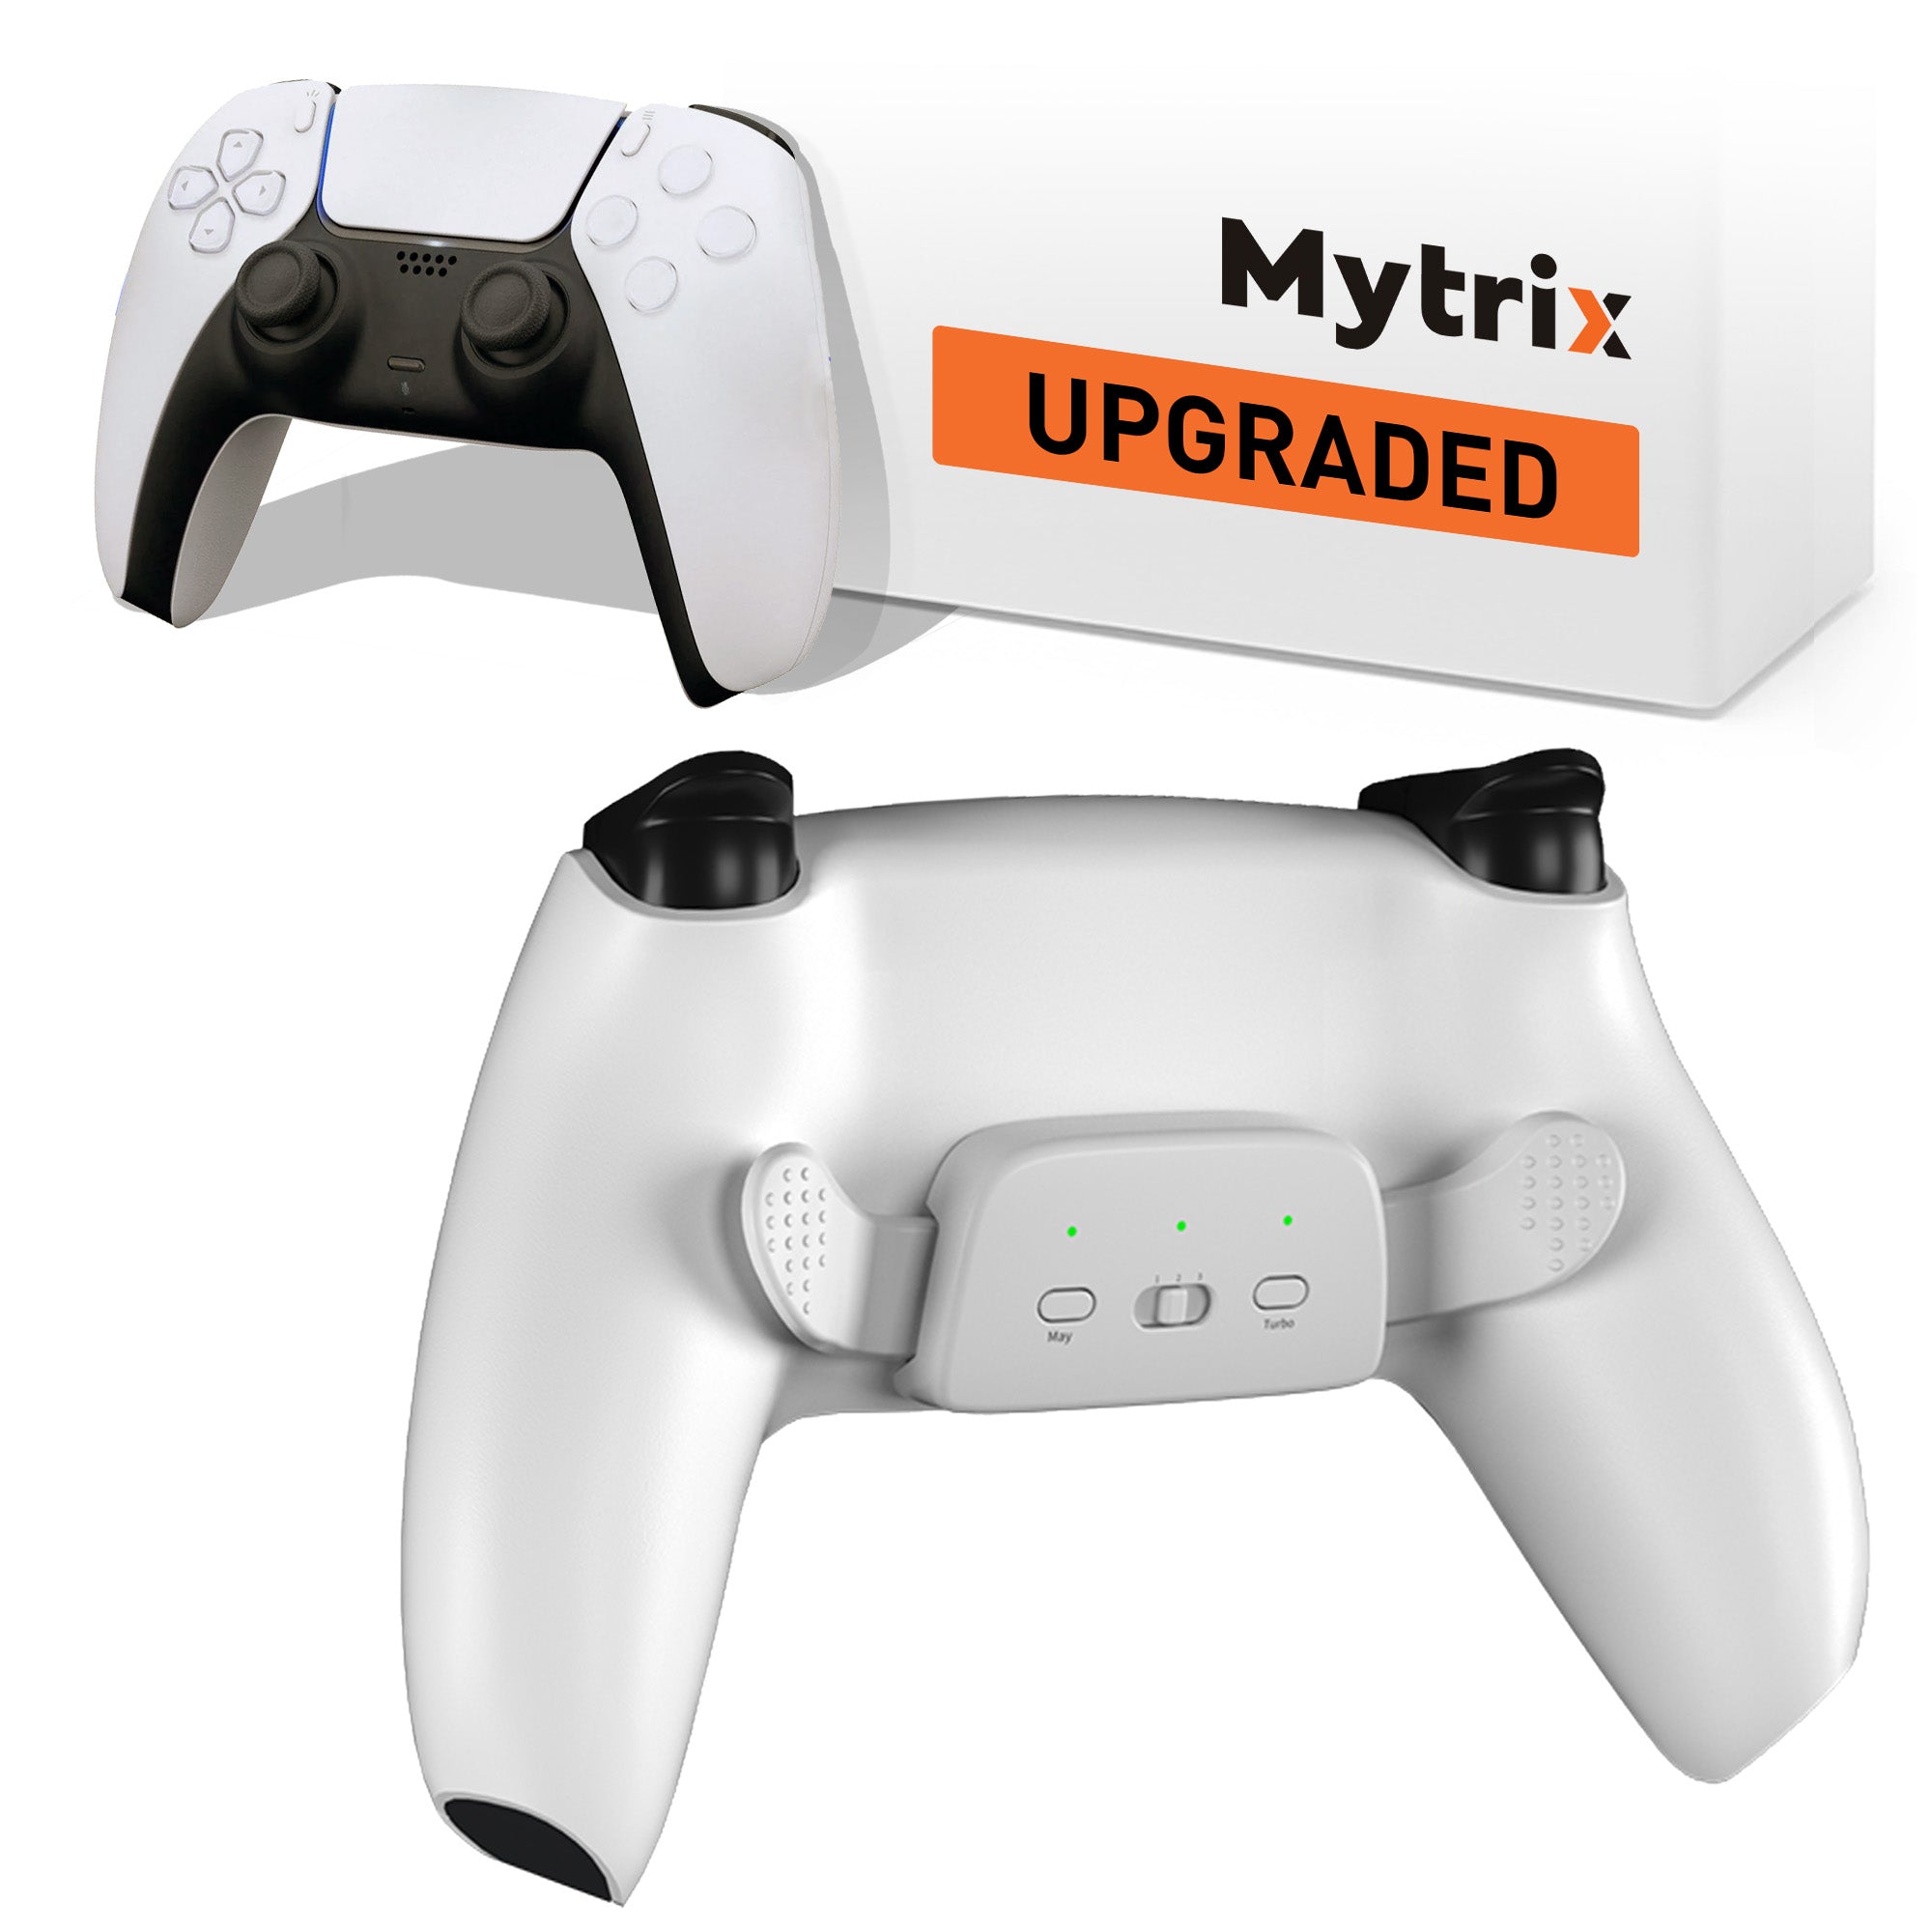 Mytrix Customized Controller with 2 Remappable Paddles for PlayStation 5 &  PC, Programmable with Fast Turbo Auto-Fire, 3 Saving Slots - Master 